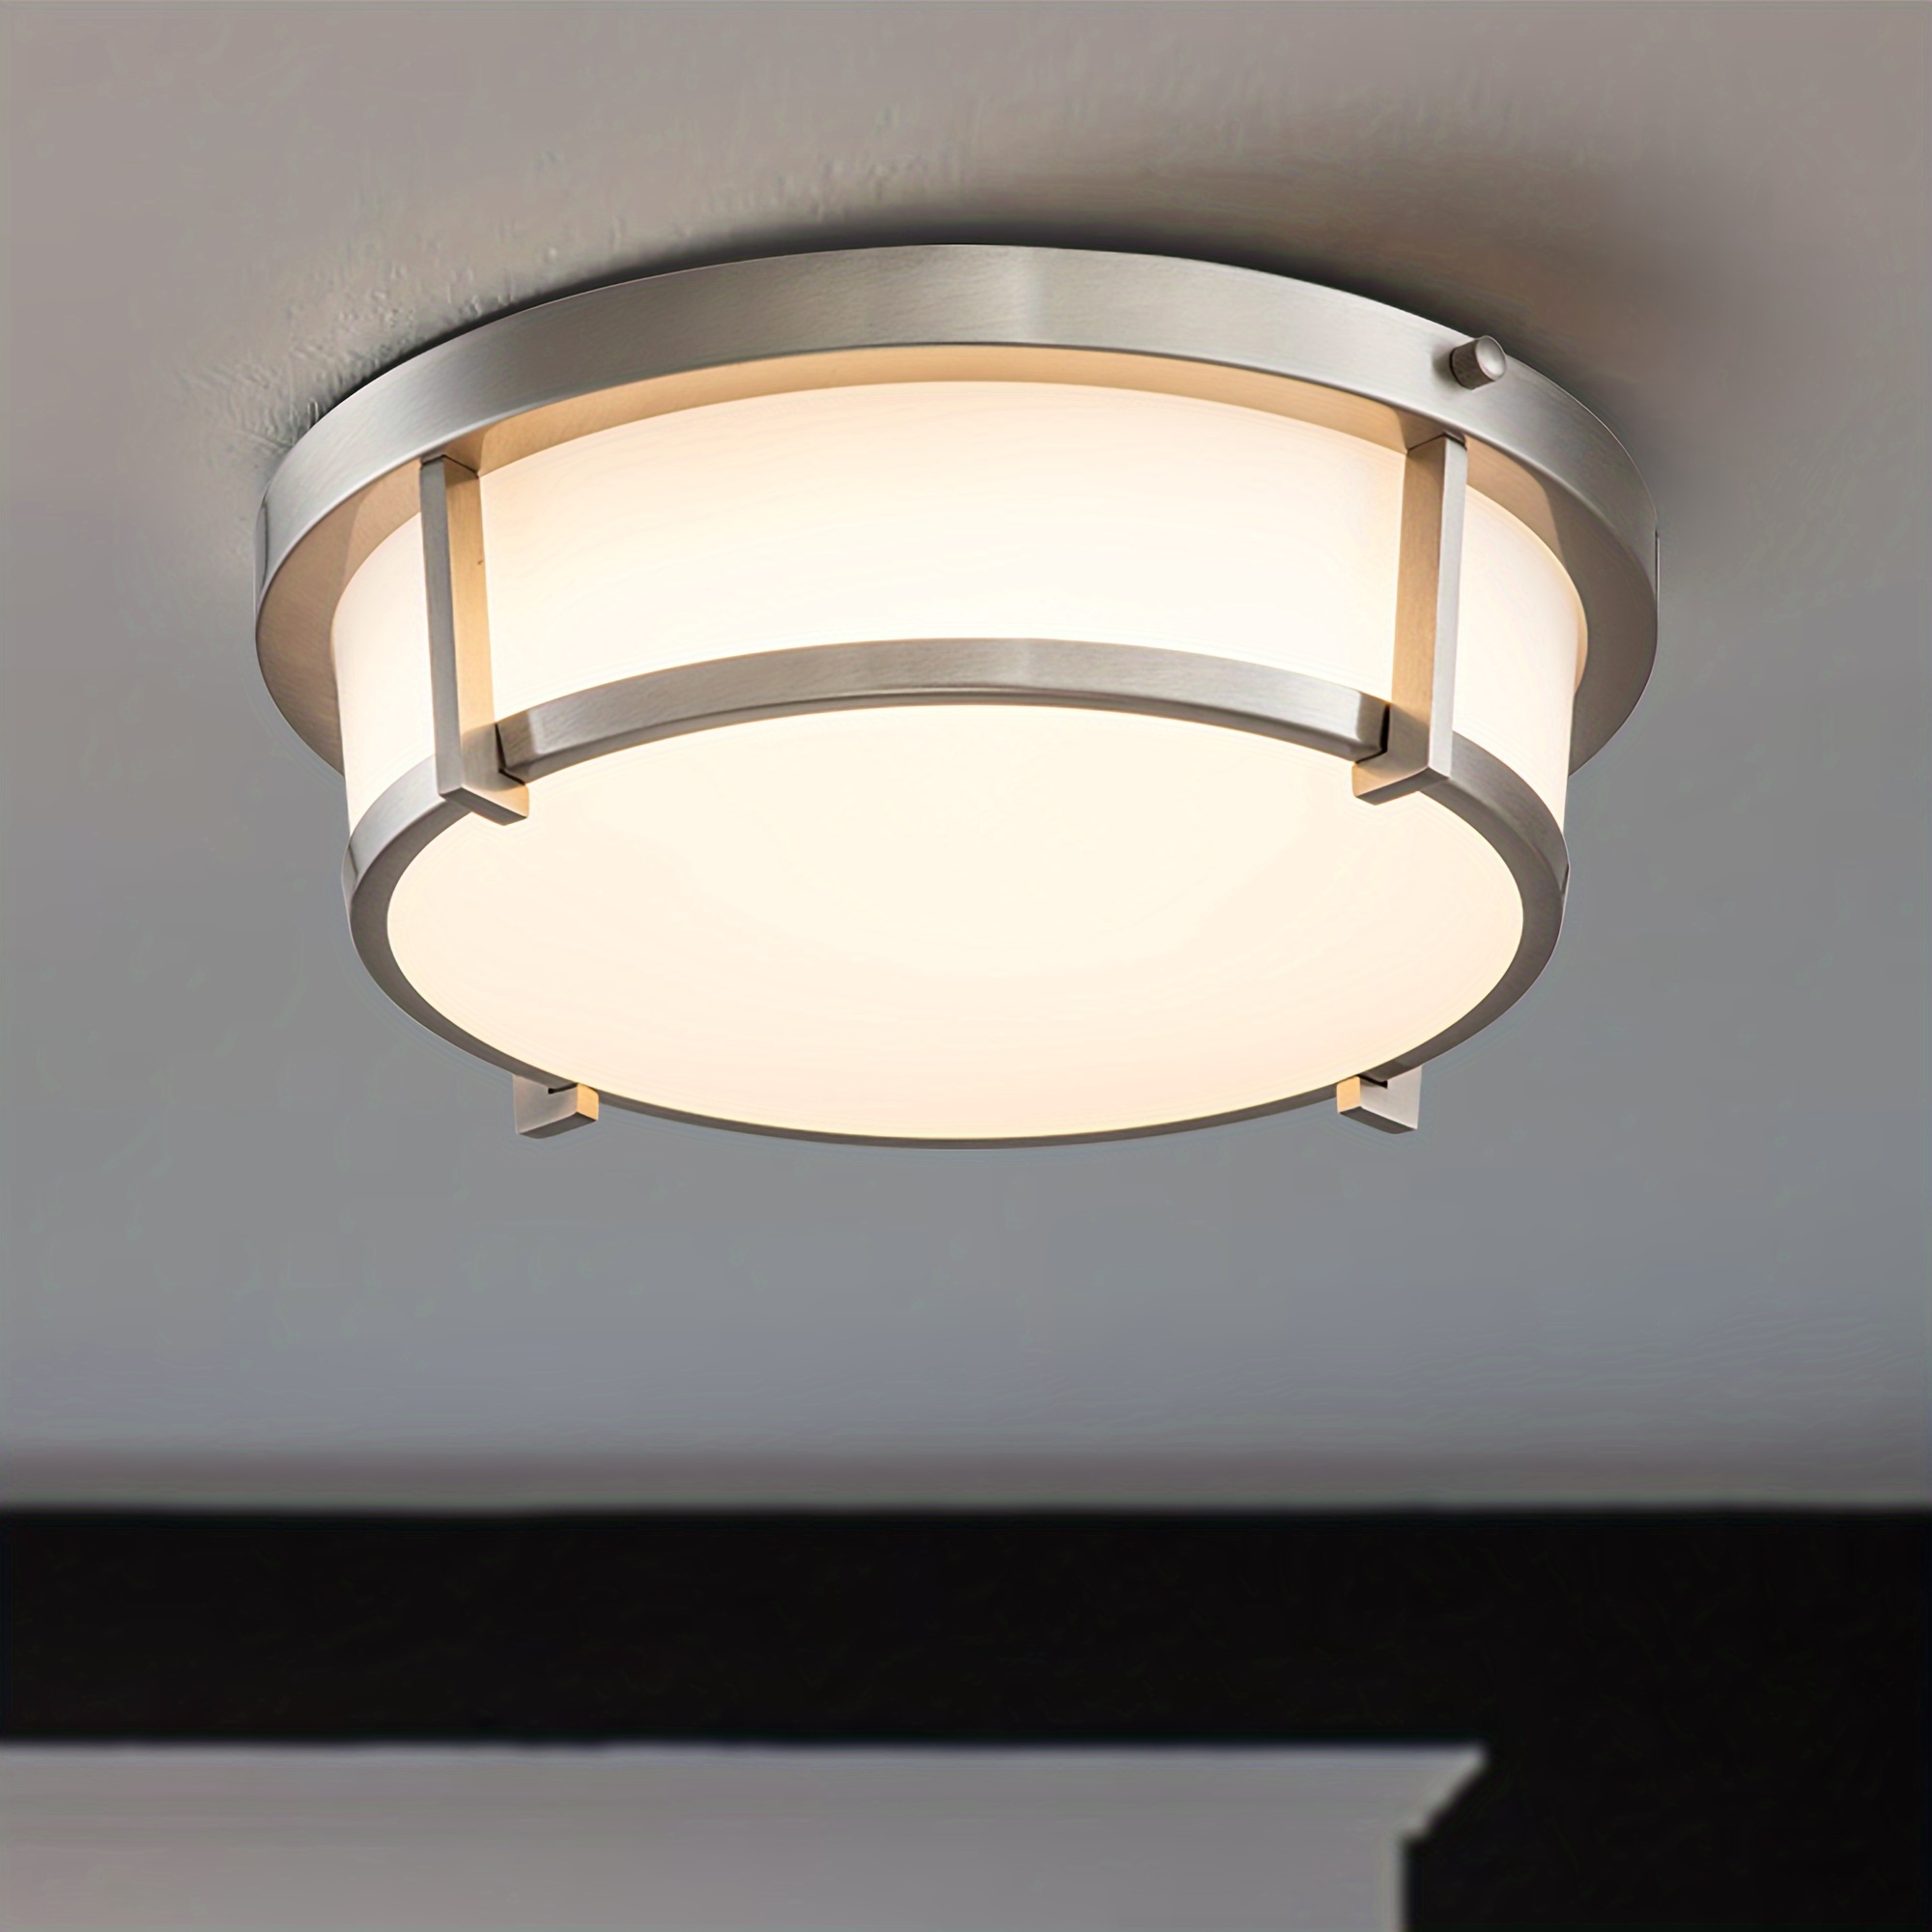 

1pc Modern Led Ceiling Light, 20w 3000k Dimmable Flush Mount Light, Brushed Nickel Finish With Circle Acrylic Lamp Shade, For Living Room, Bedroom, Dining Room, Office, Hallway, Closet, Balcony